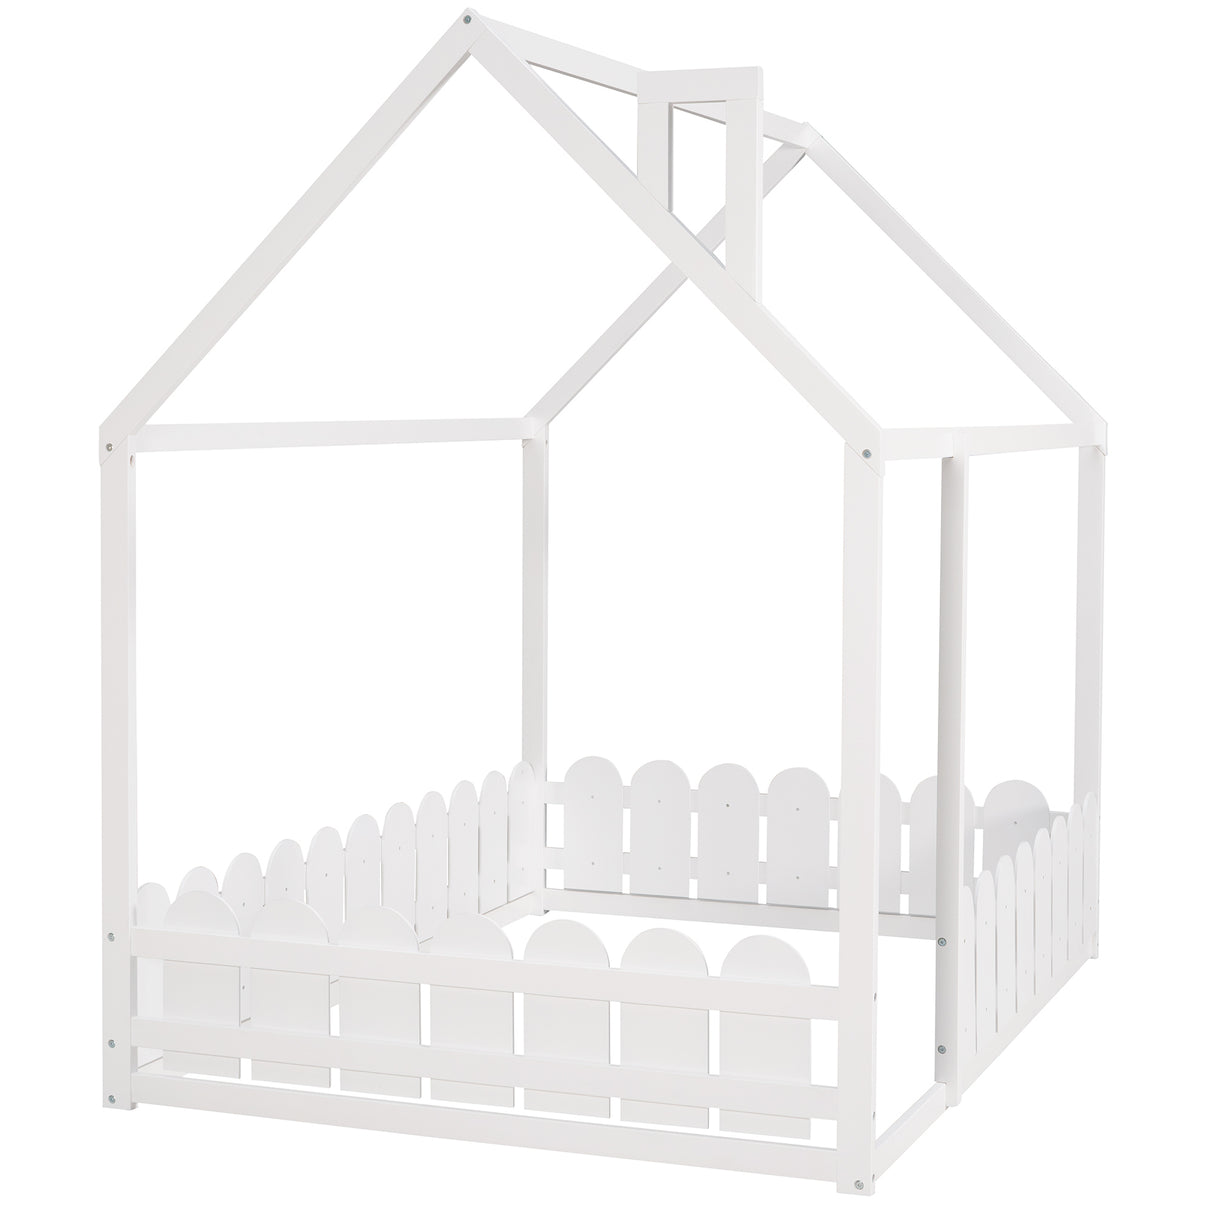 （Slats are not included) Full Size Wood Bed House Bed Frame with Fence, for Kids, Teens, Girls, Boys (White )(OLD SKU:WF281294AAK)